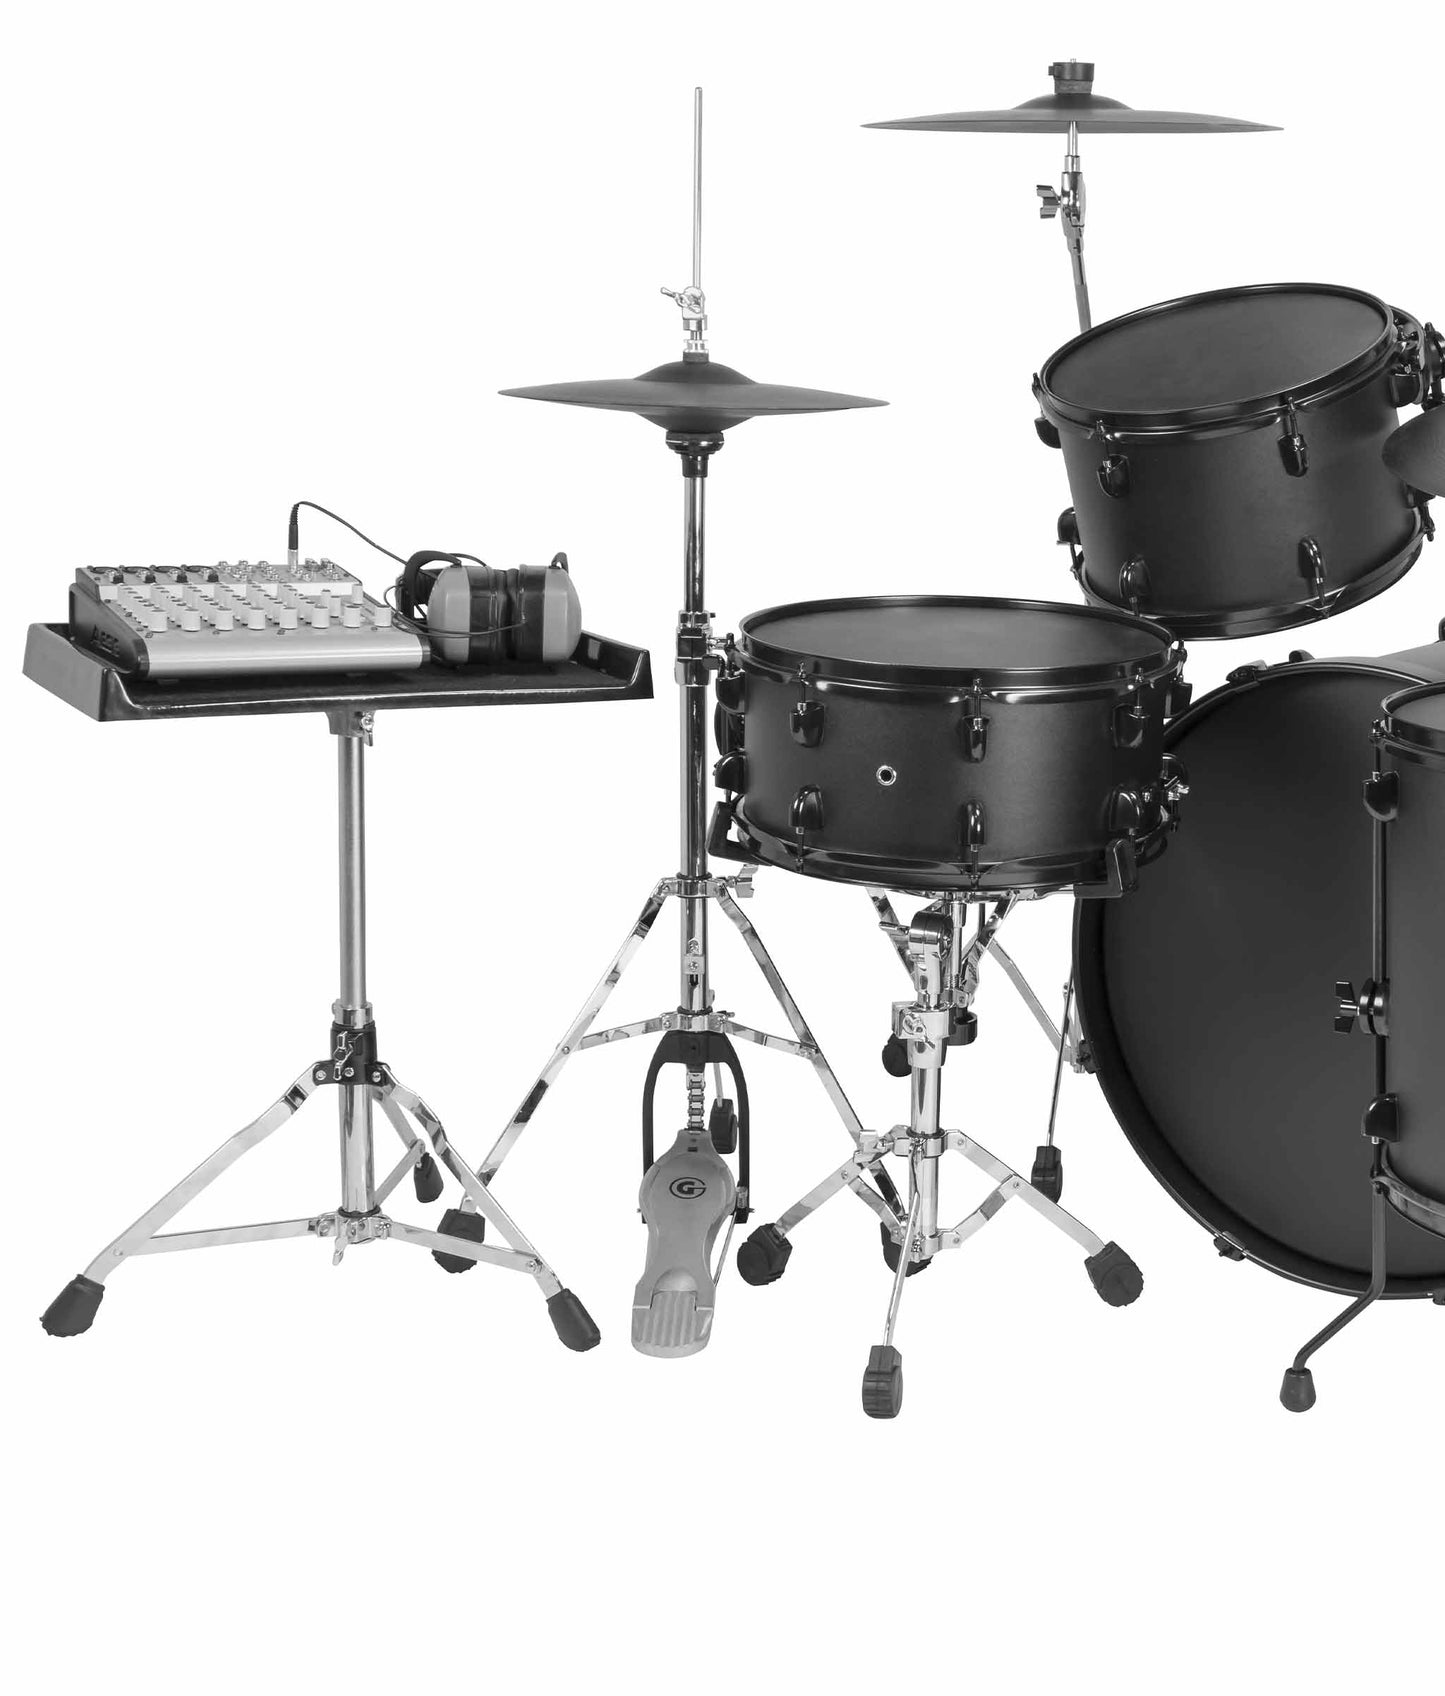  Gibraltar G-PSES 16" x 10" Sidekick Essentials Fiberglass Table with Stand percussion table